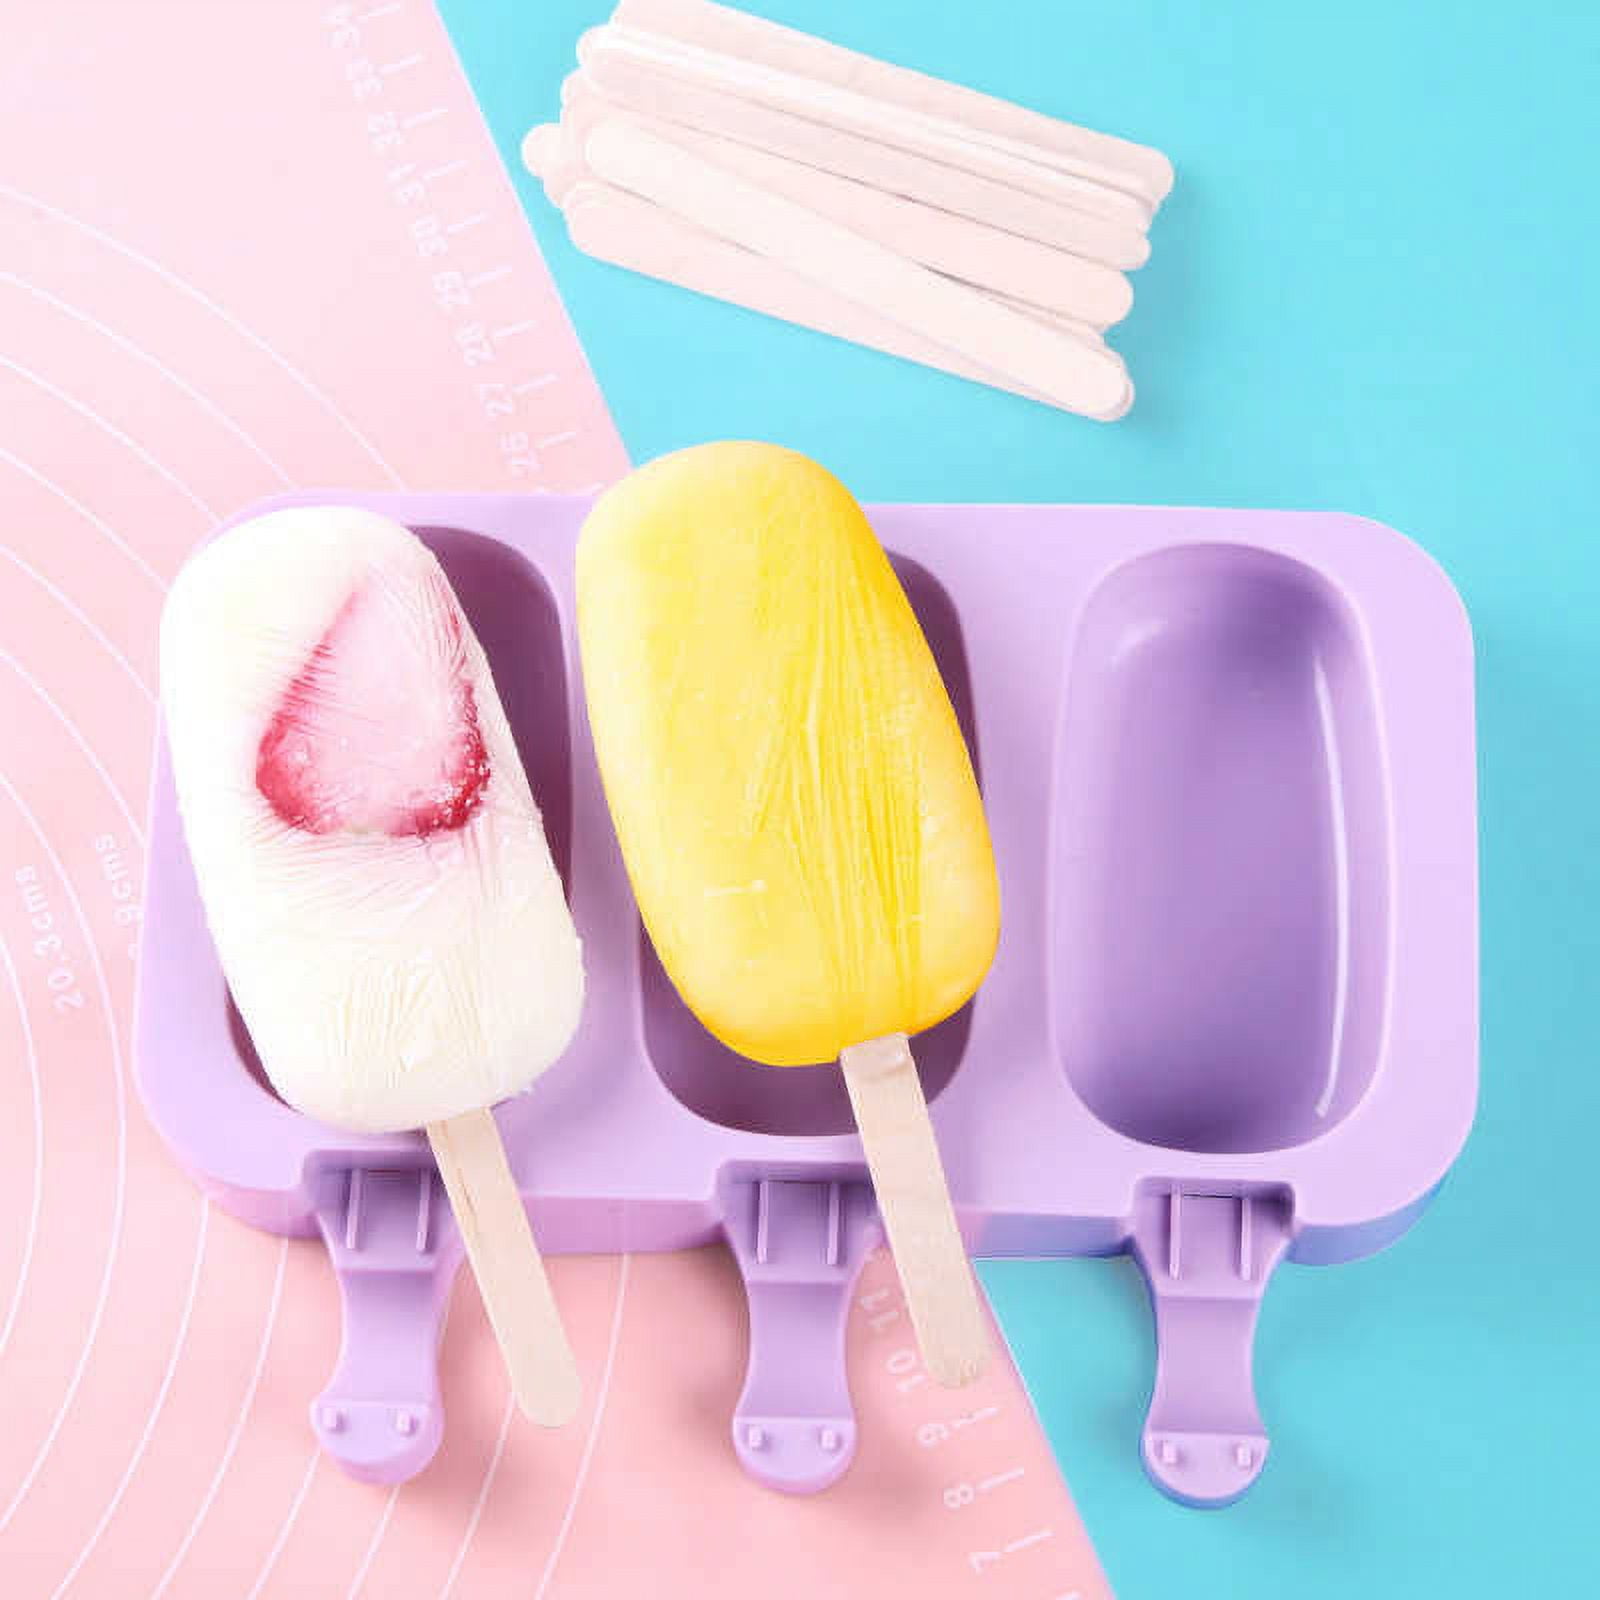 Miaowoof Homemade Popsicles Molds, Silicone Ice Popsicle Maker, Mini  Popsicle Molds for Kid Toddler Baby, Ice Pop Molds with 50 Popsicle Sticks,  50